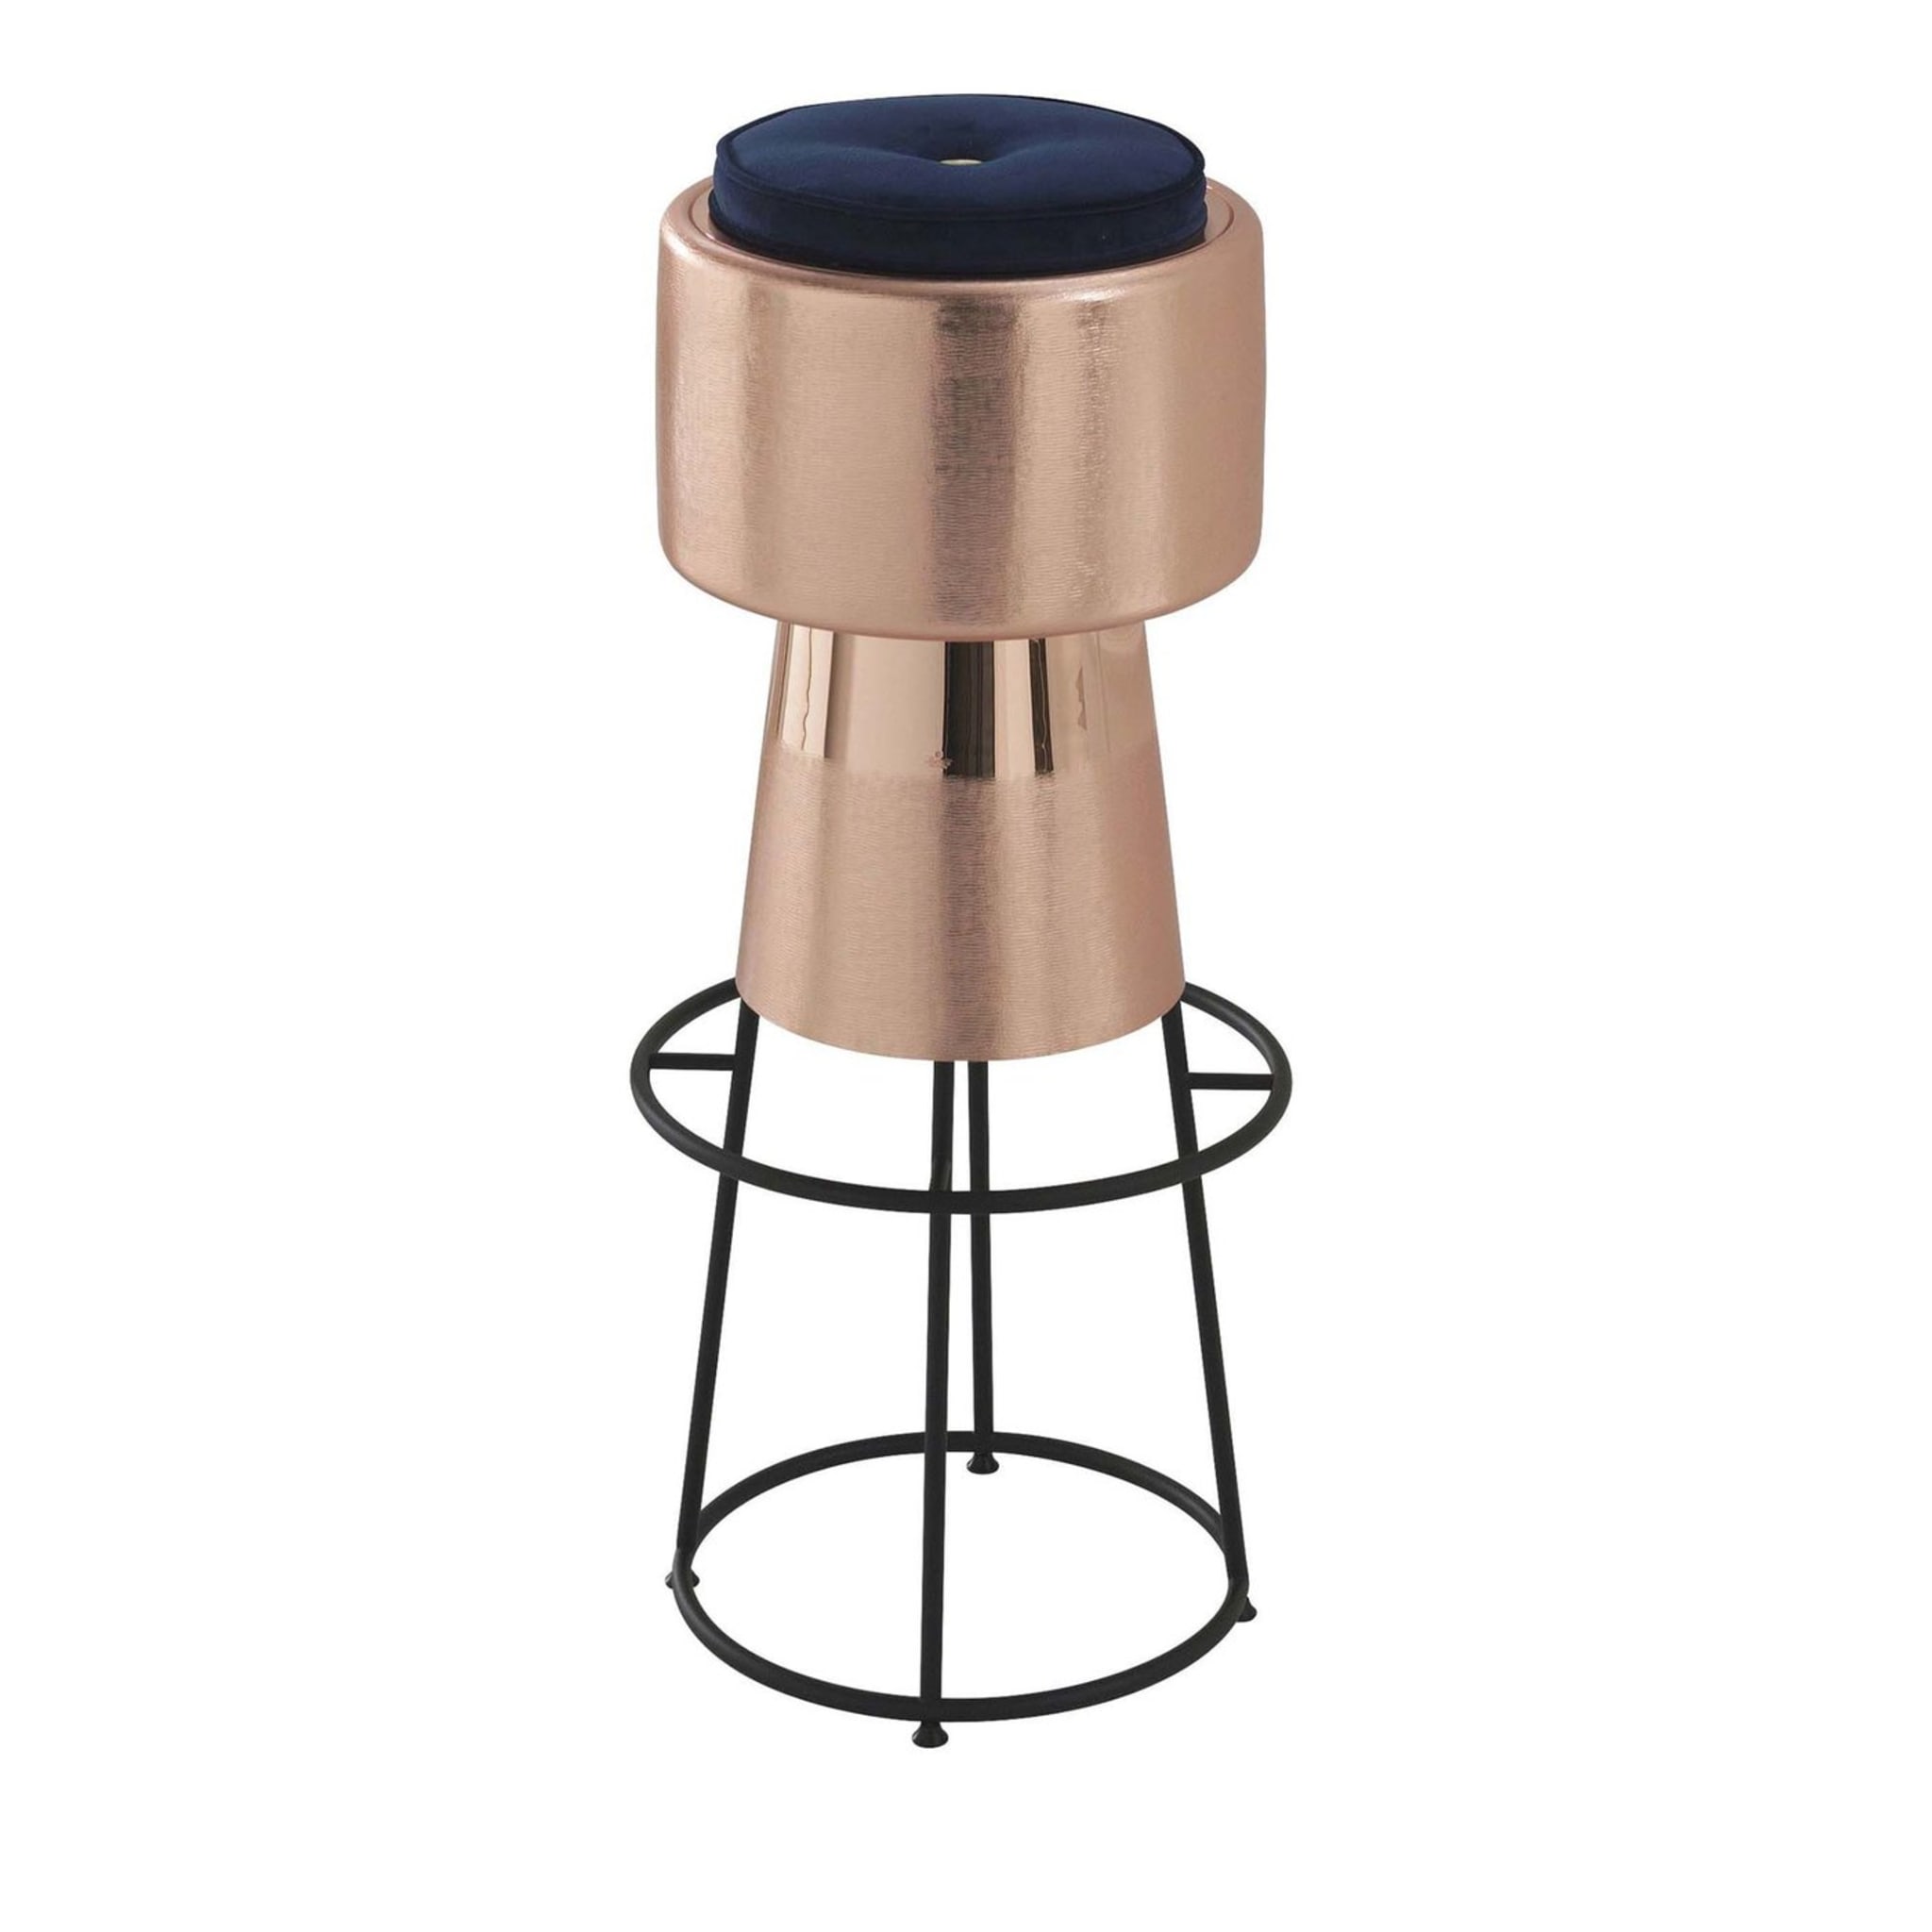 Tappo Copper Bar Stool by NOOII - Main view